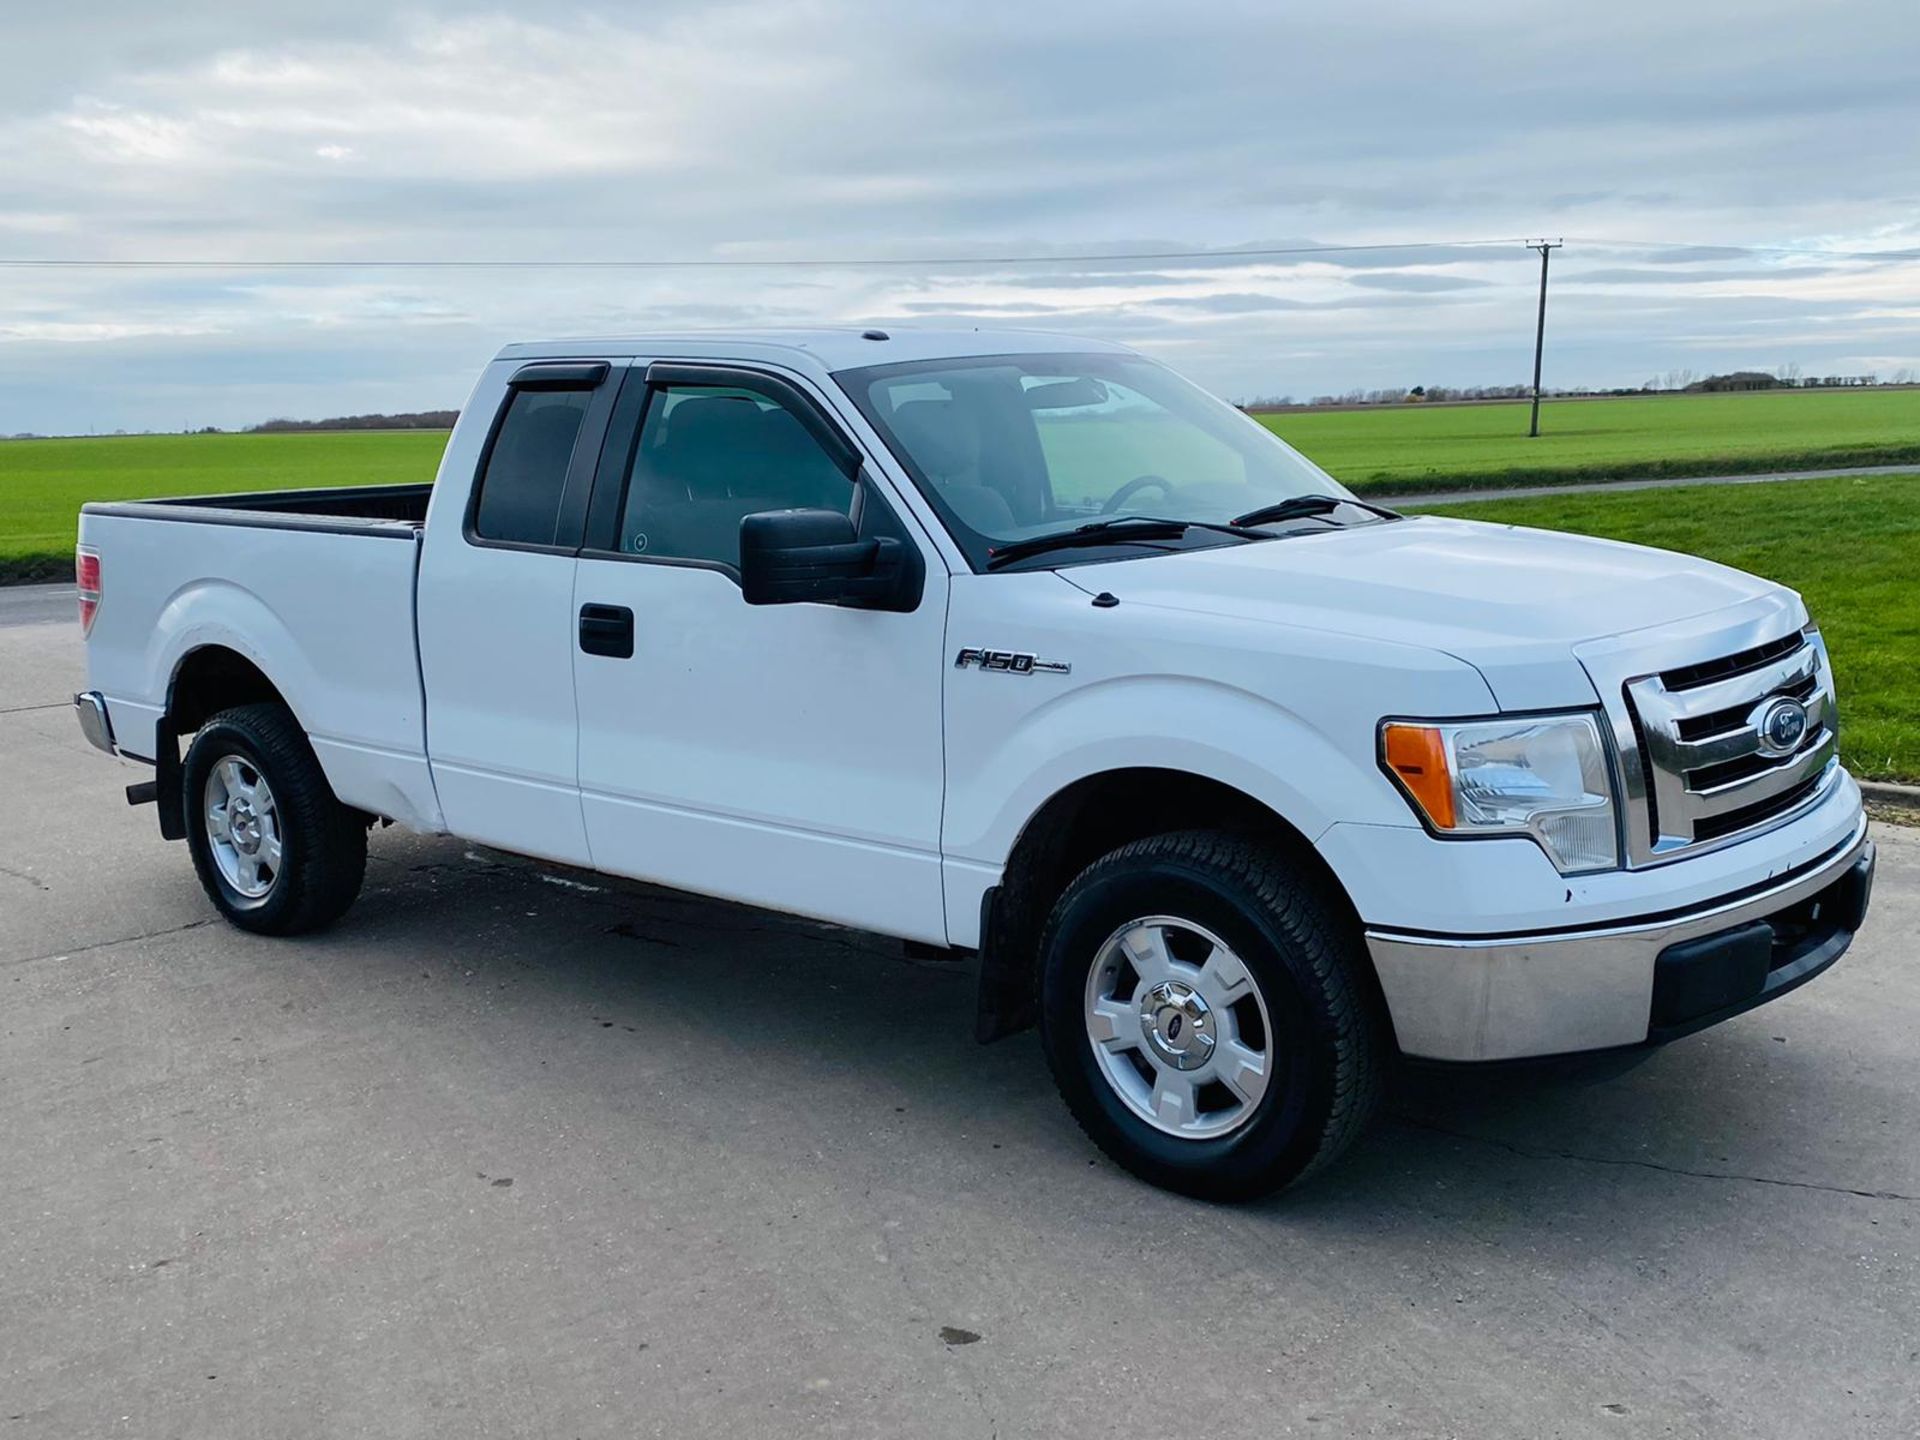 Ford F-150 XLT 3.7L V6 SuperCab - 2012 Year - 6 Seats - Air con - Fresh Import - - Image 8 of 24